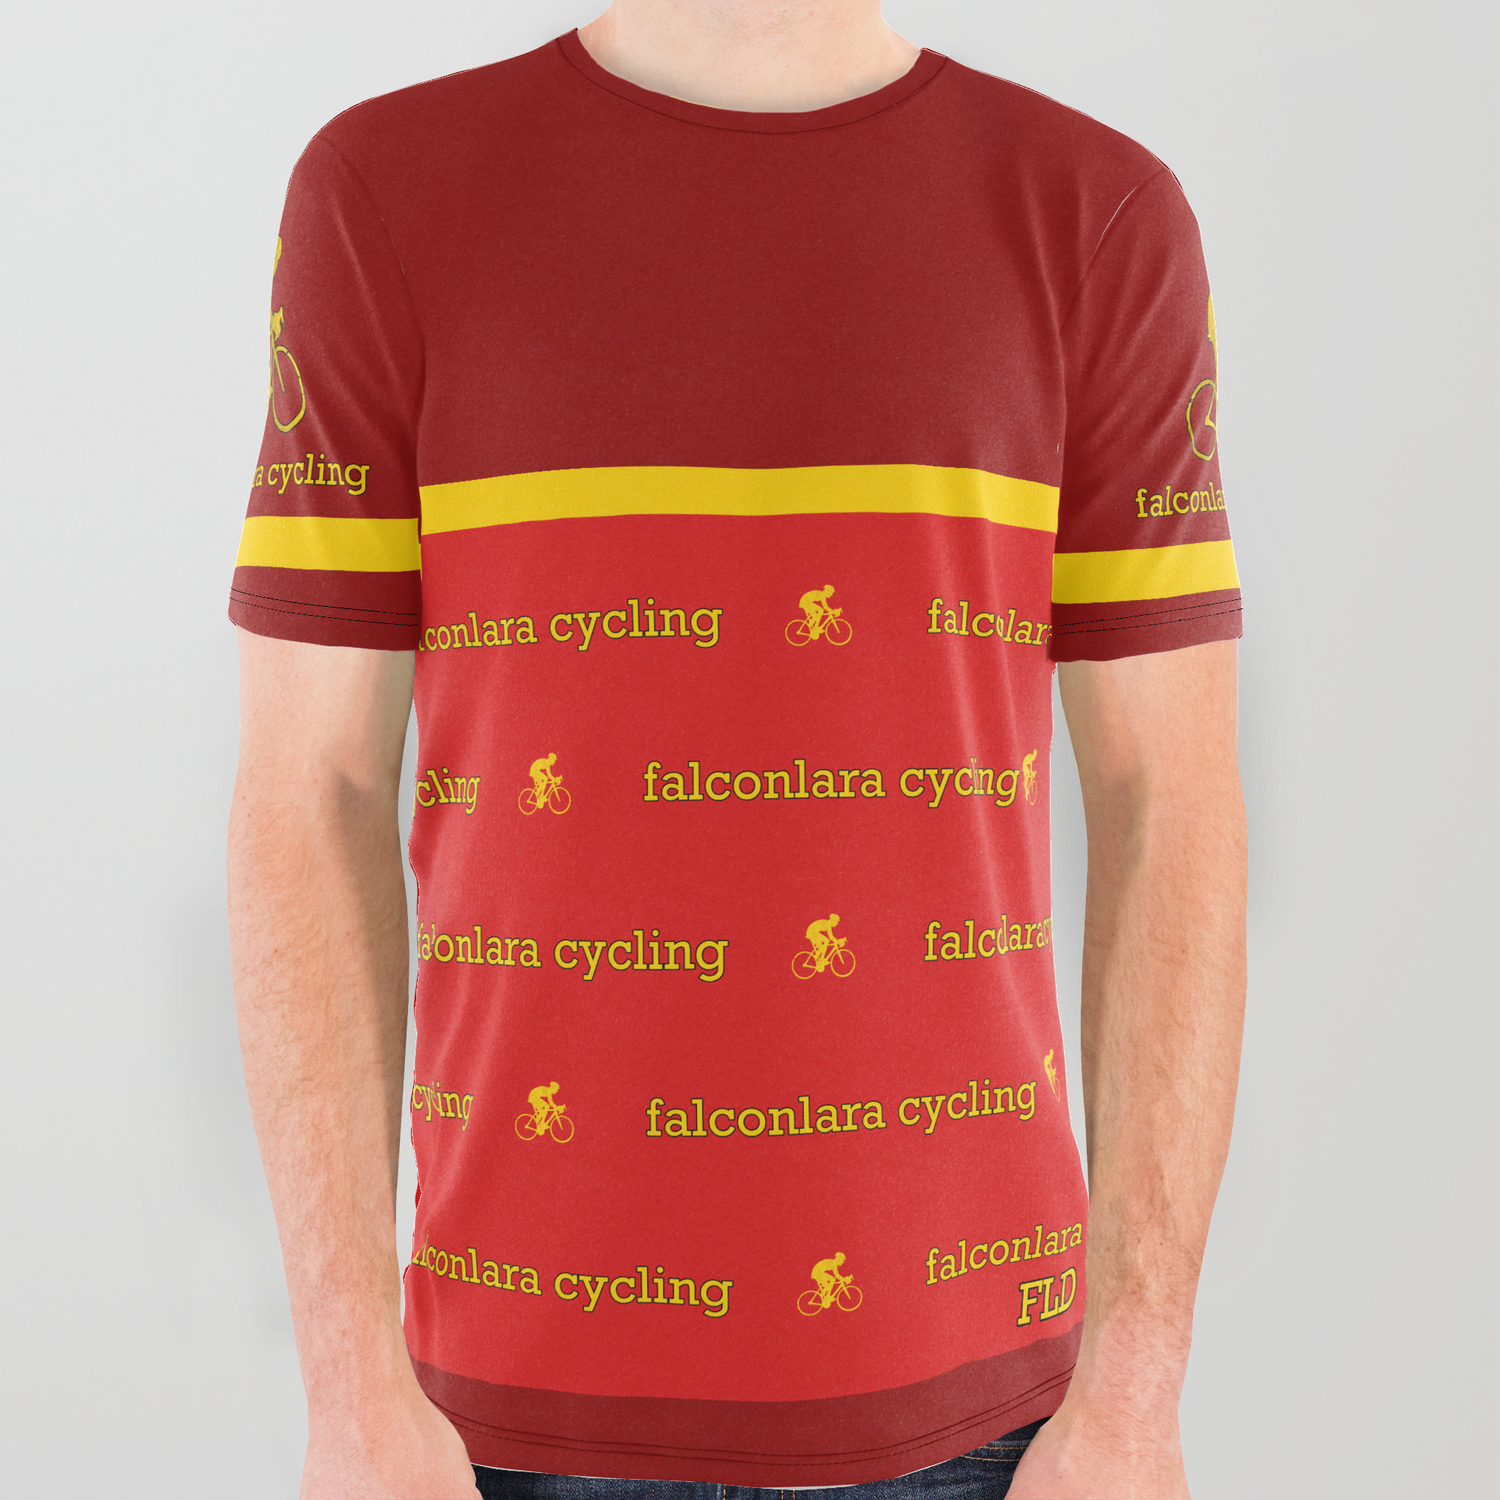 red and yellow graphic tee